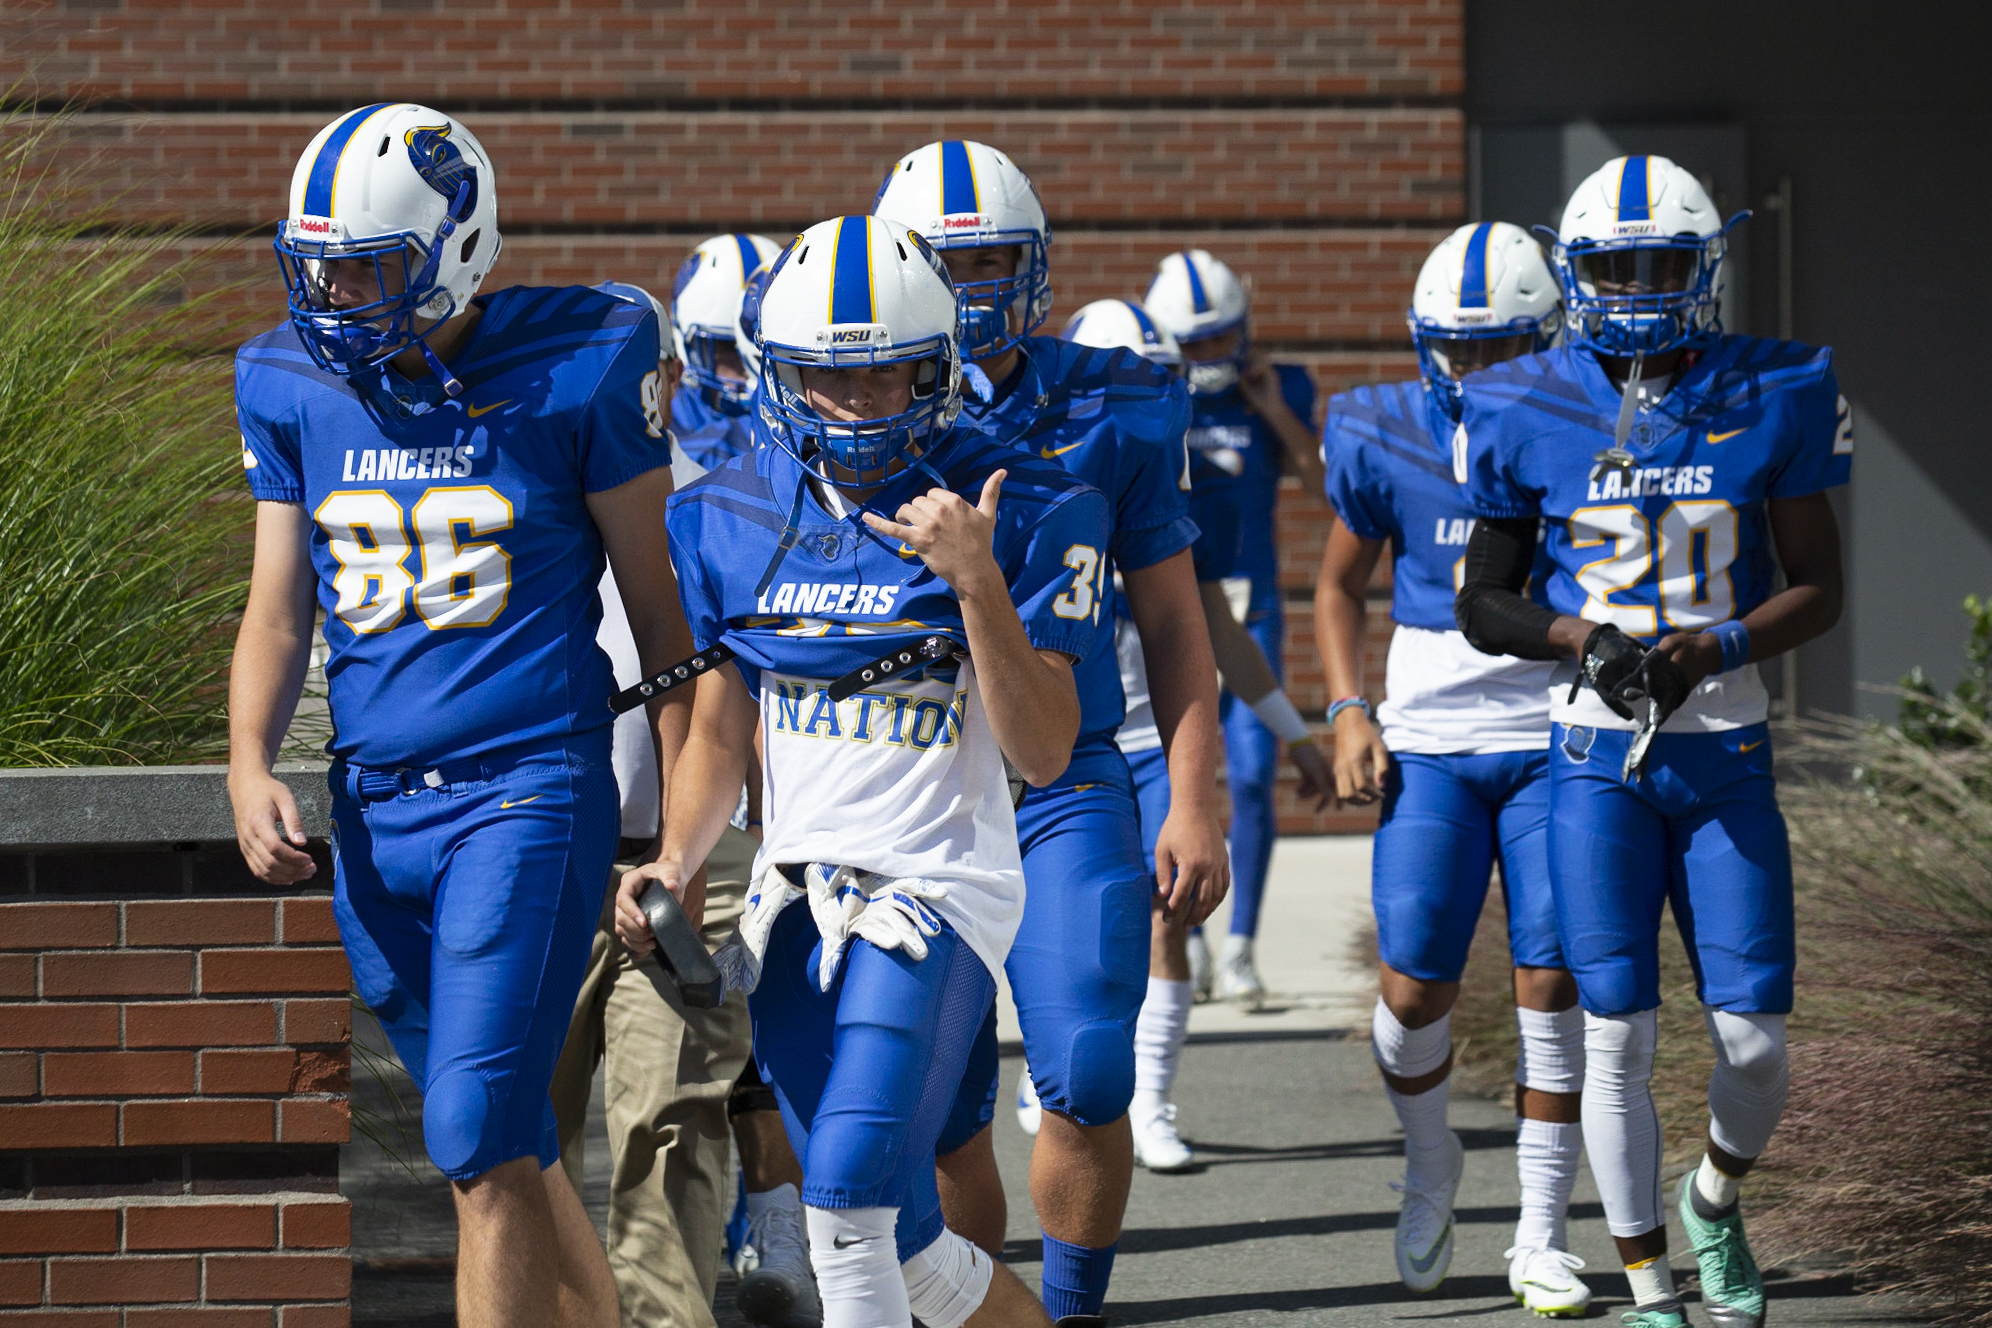 The Worcester State Football team walking on the football field before a game